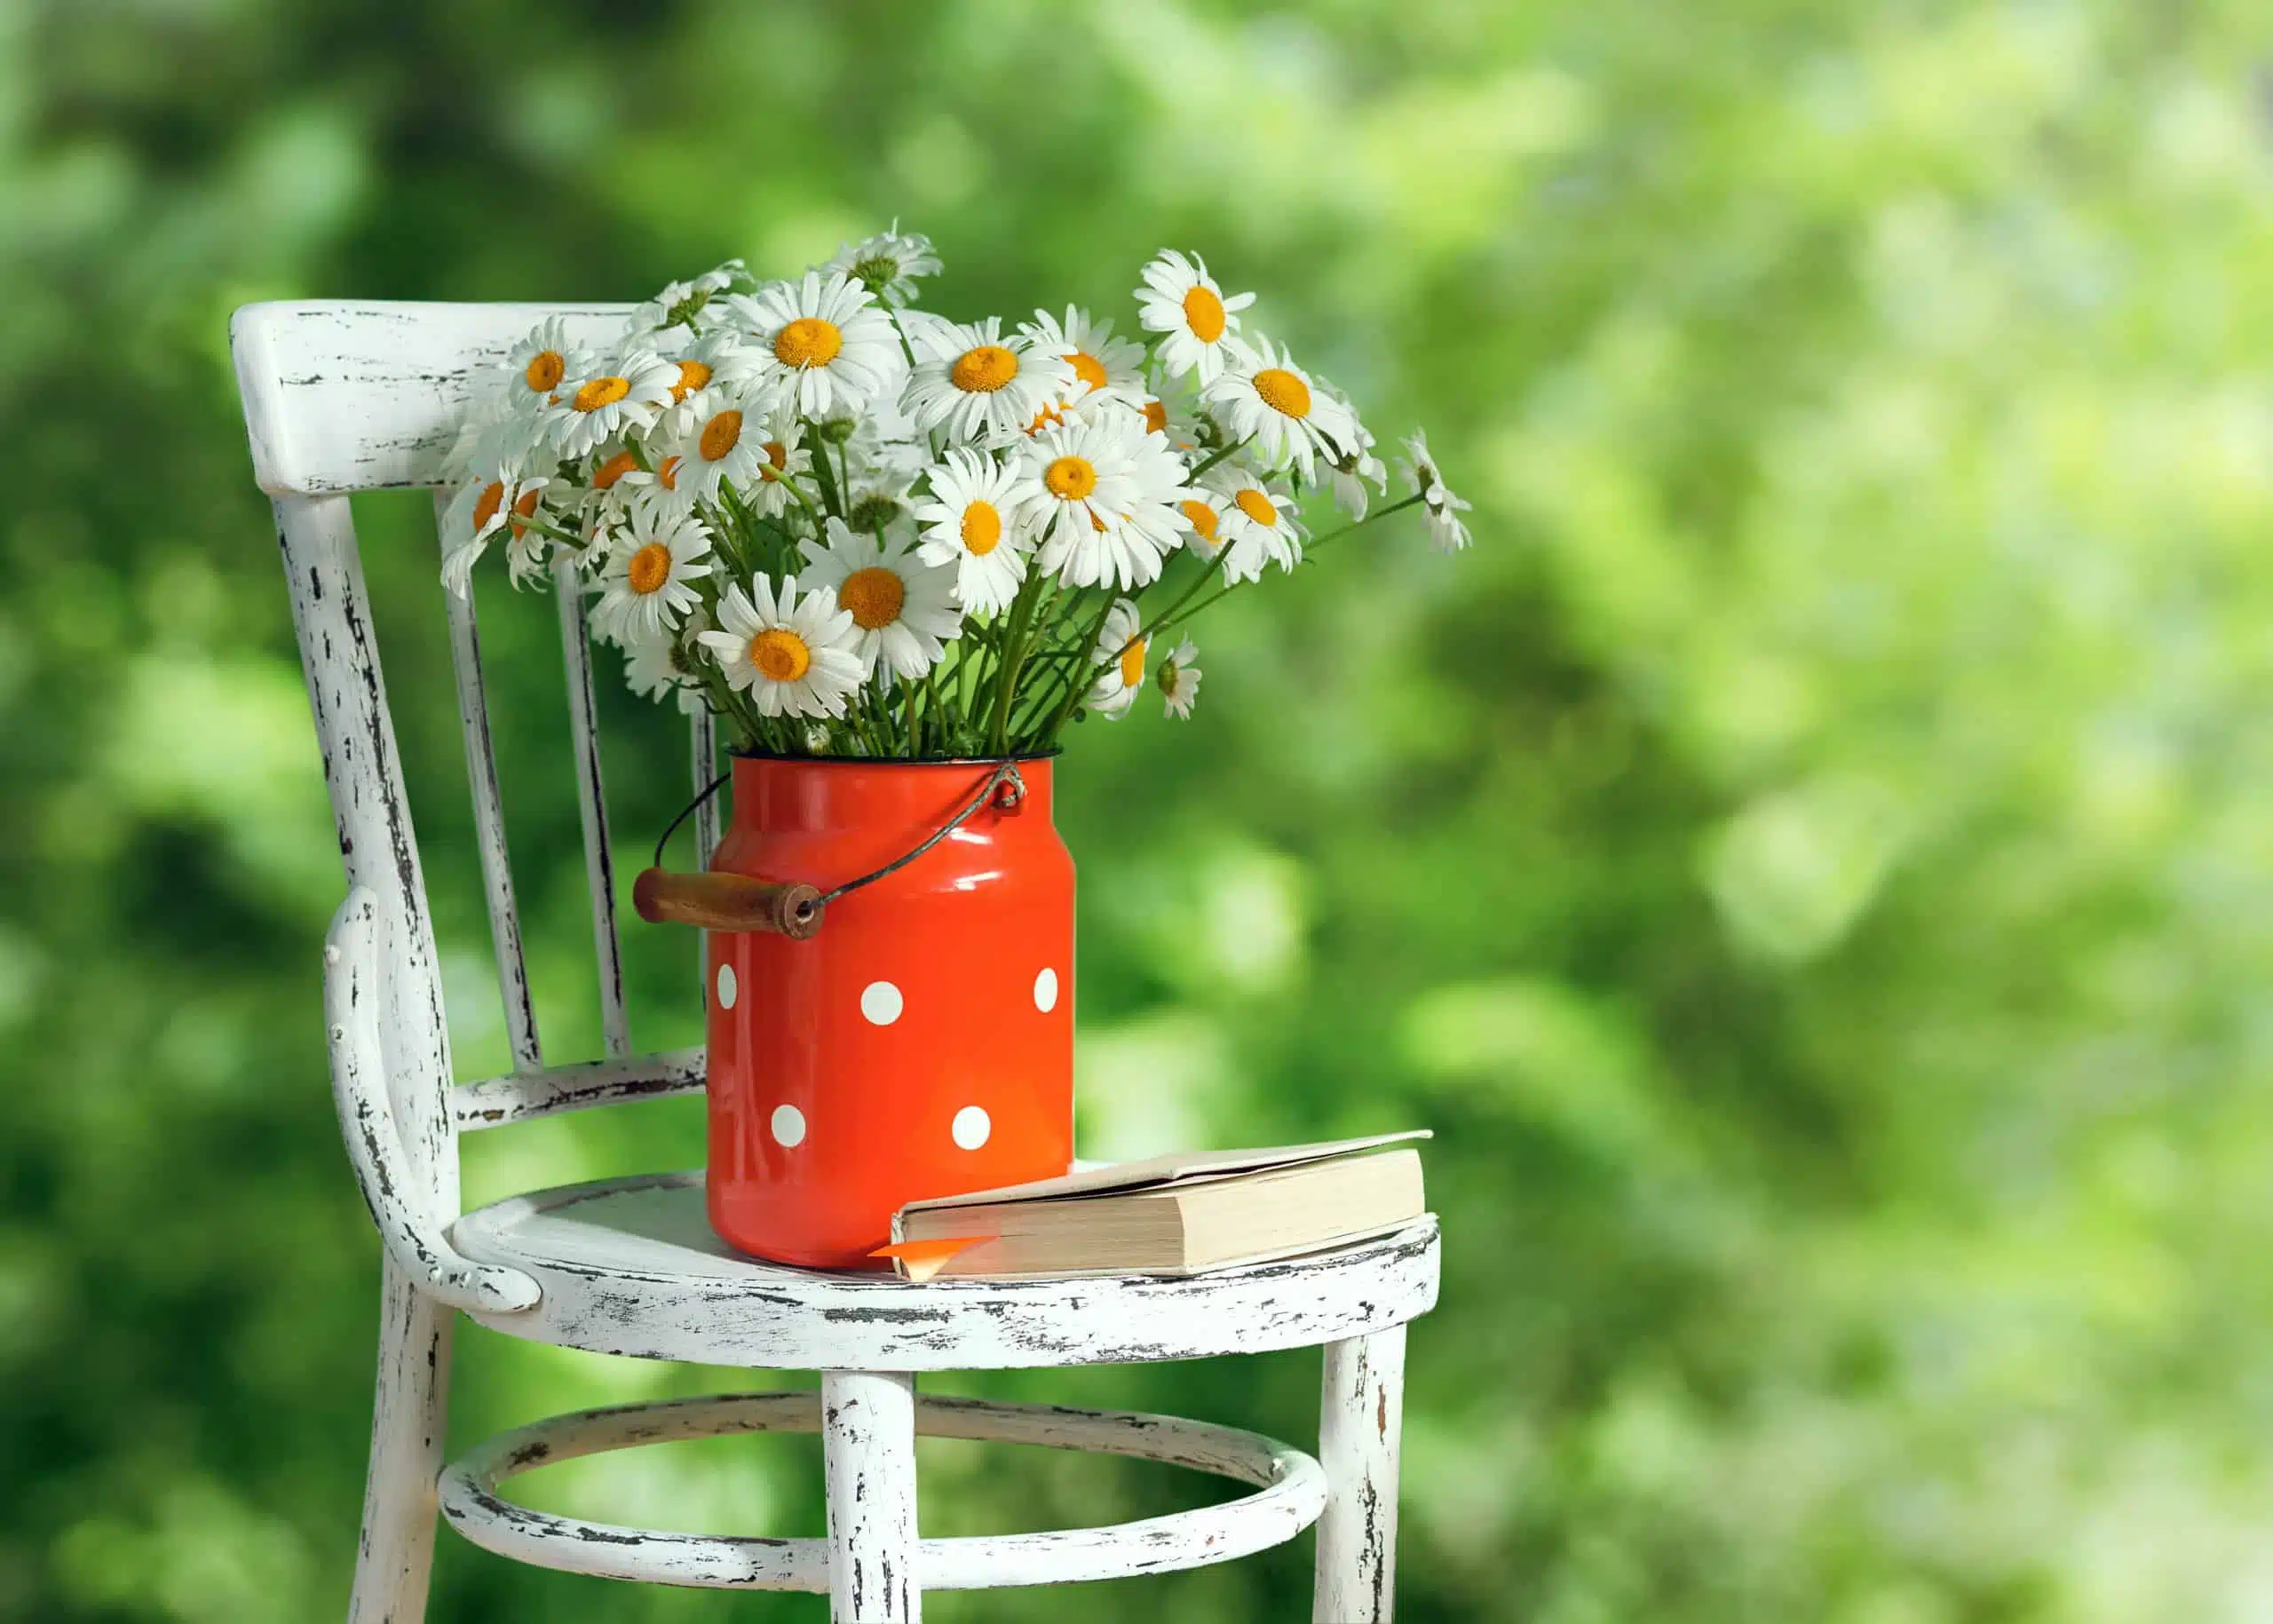 Daisies in the old cans and a book on the white wooden round chair.